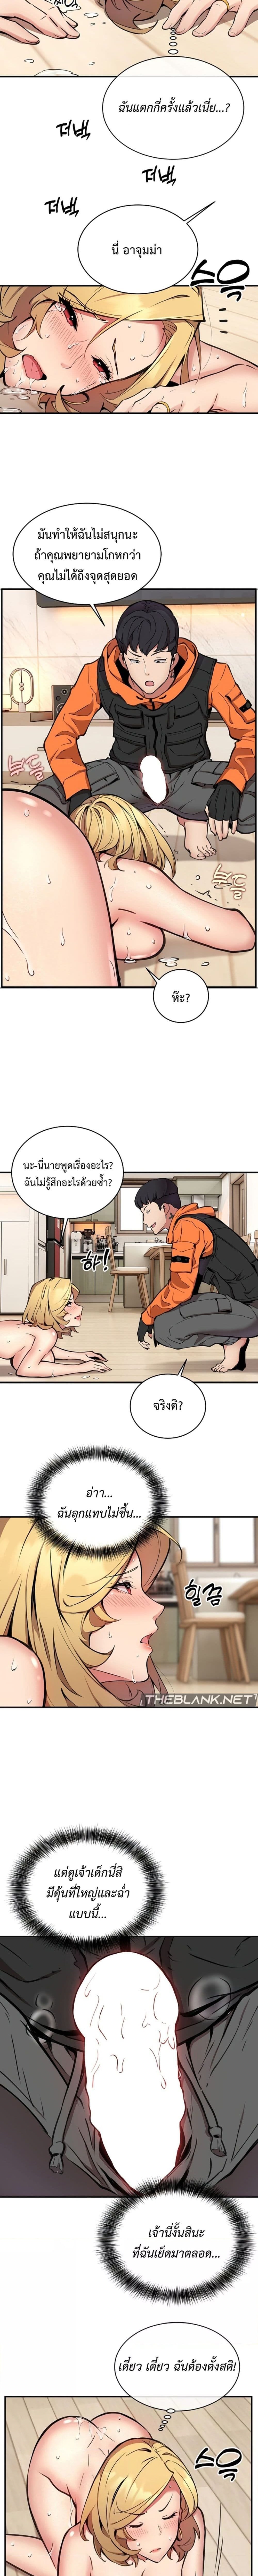 Driver in the New City ตอนที่ 5 ภาพ 9